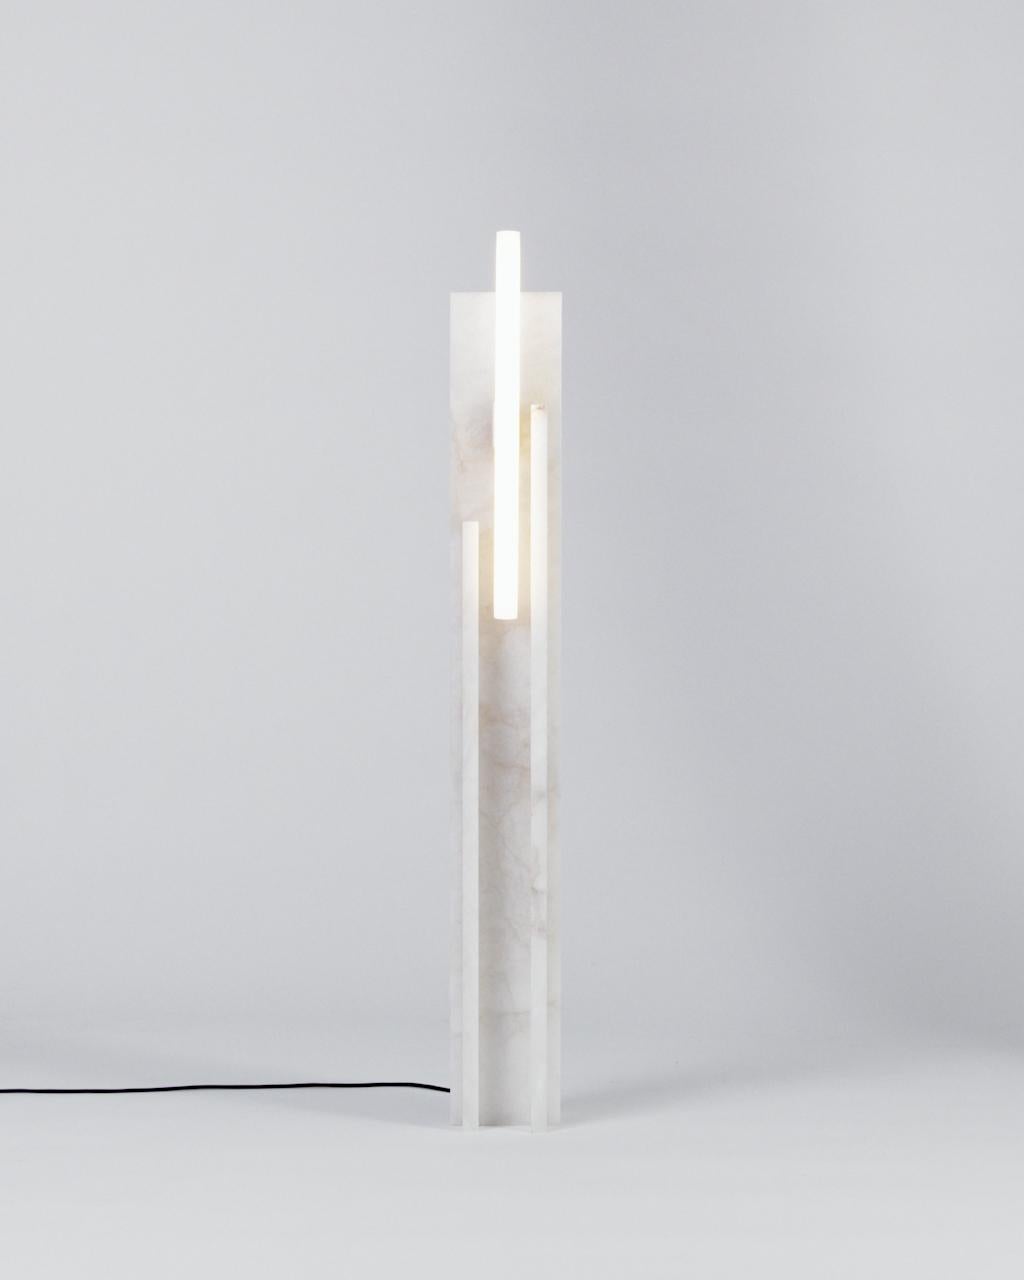 Alabaster medium lamp by Owl.
Dimensions: D 15 x W 15 x H 115 cm.
Materials: solid Alabaster.
Also available in different dimensions. 

All our lamps can be wired according to each country. If sold to the USA it will be wired for the USA for